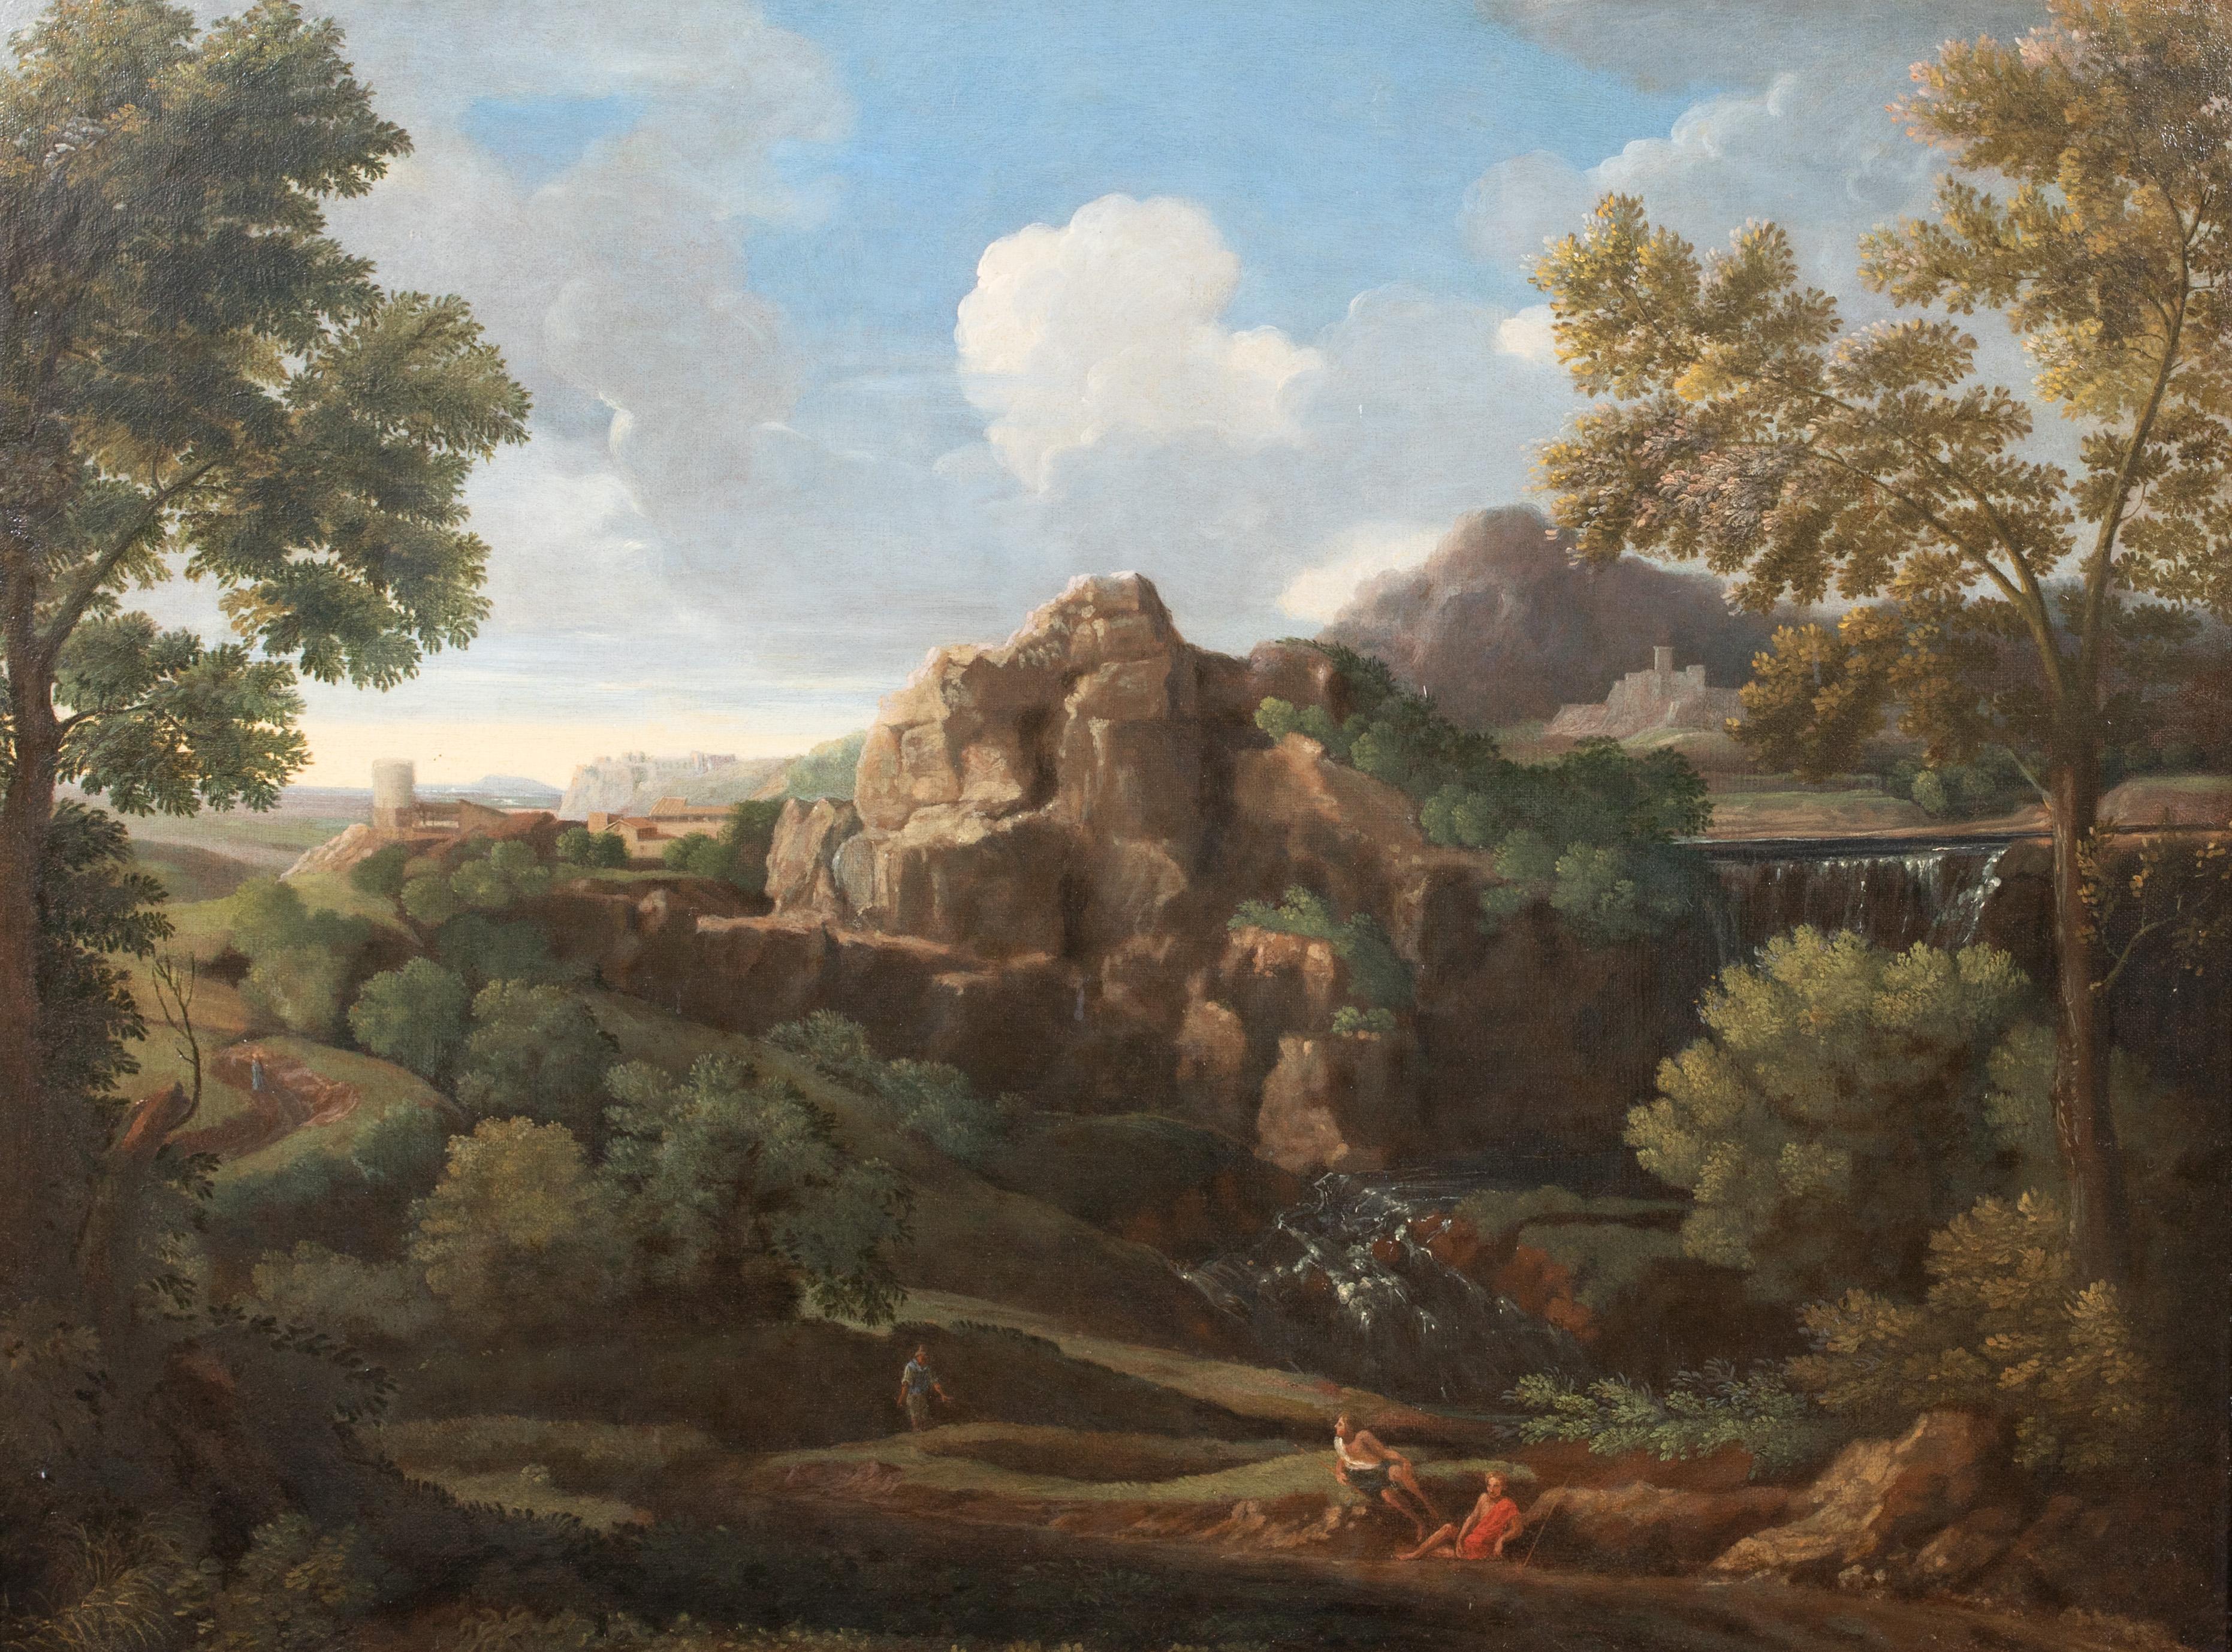 Figures In A Waterfall Landscape, 17th Century - Painting by (Attributed to) Nicolas Poussin